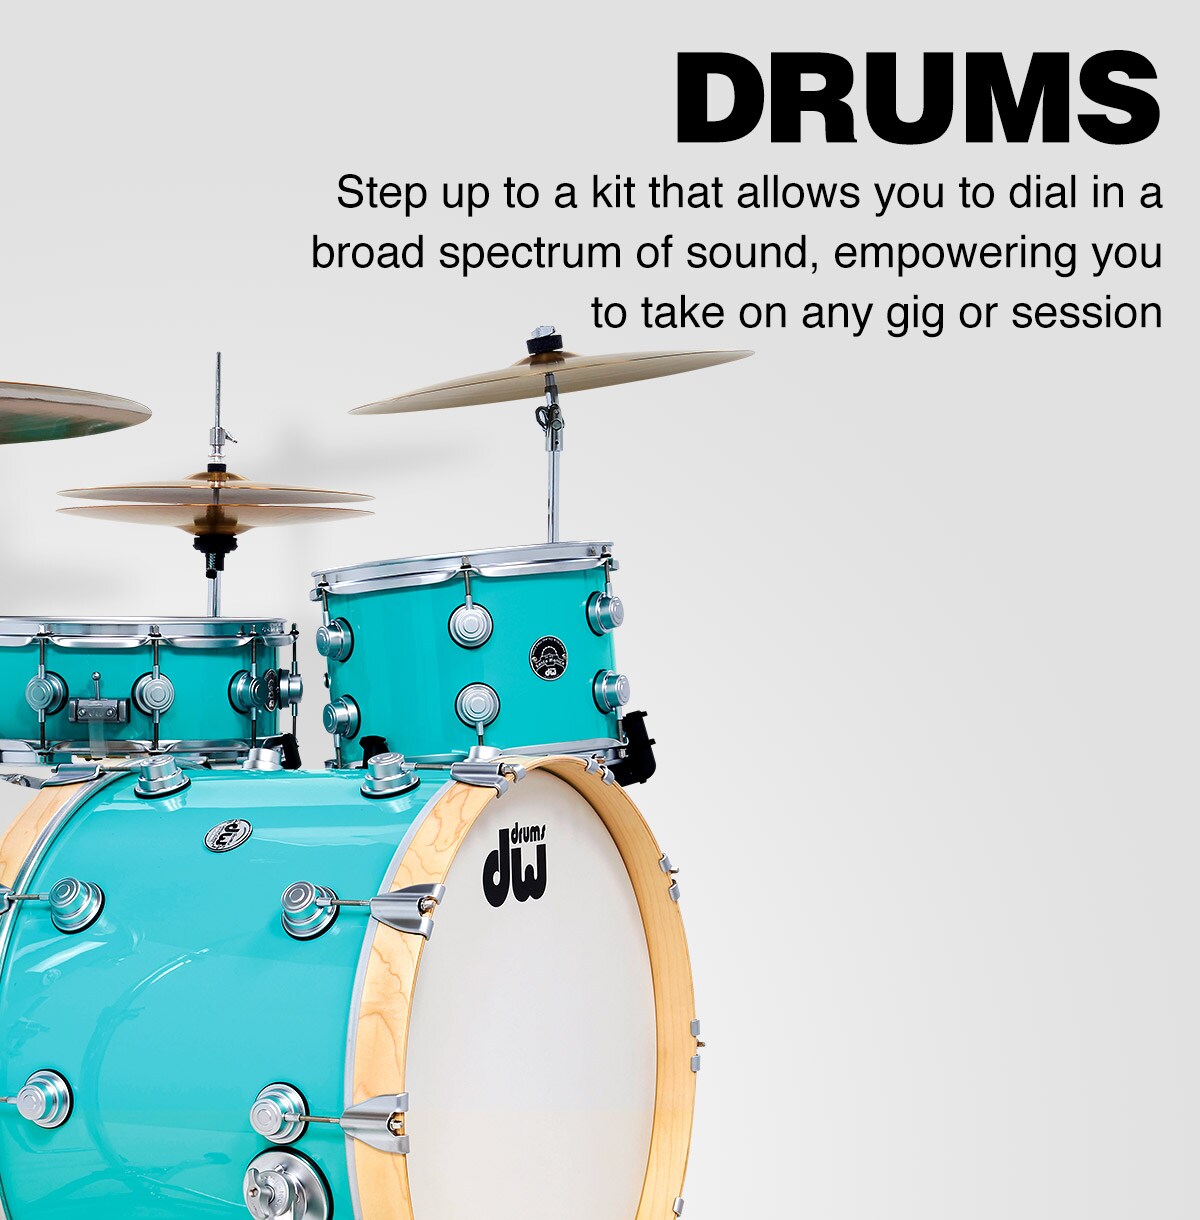 Drums. Step up to a kit that allows you to dial in a broad spectrum of sound, empowering you to take on any gig or session.